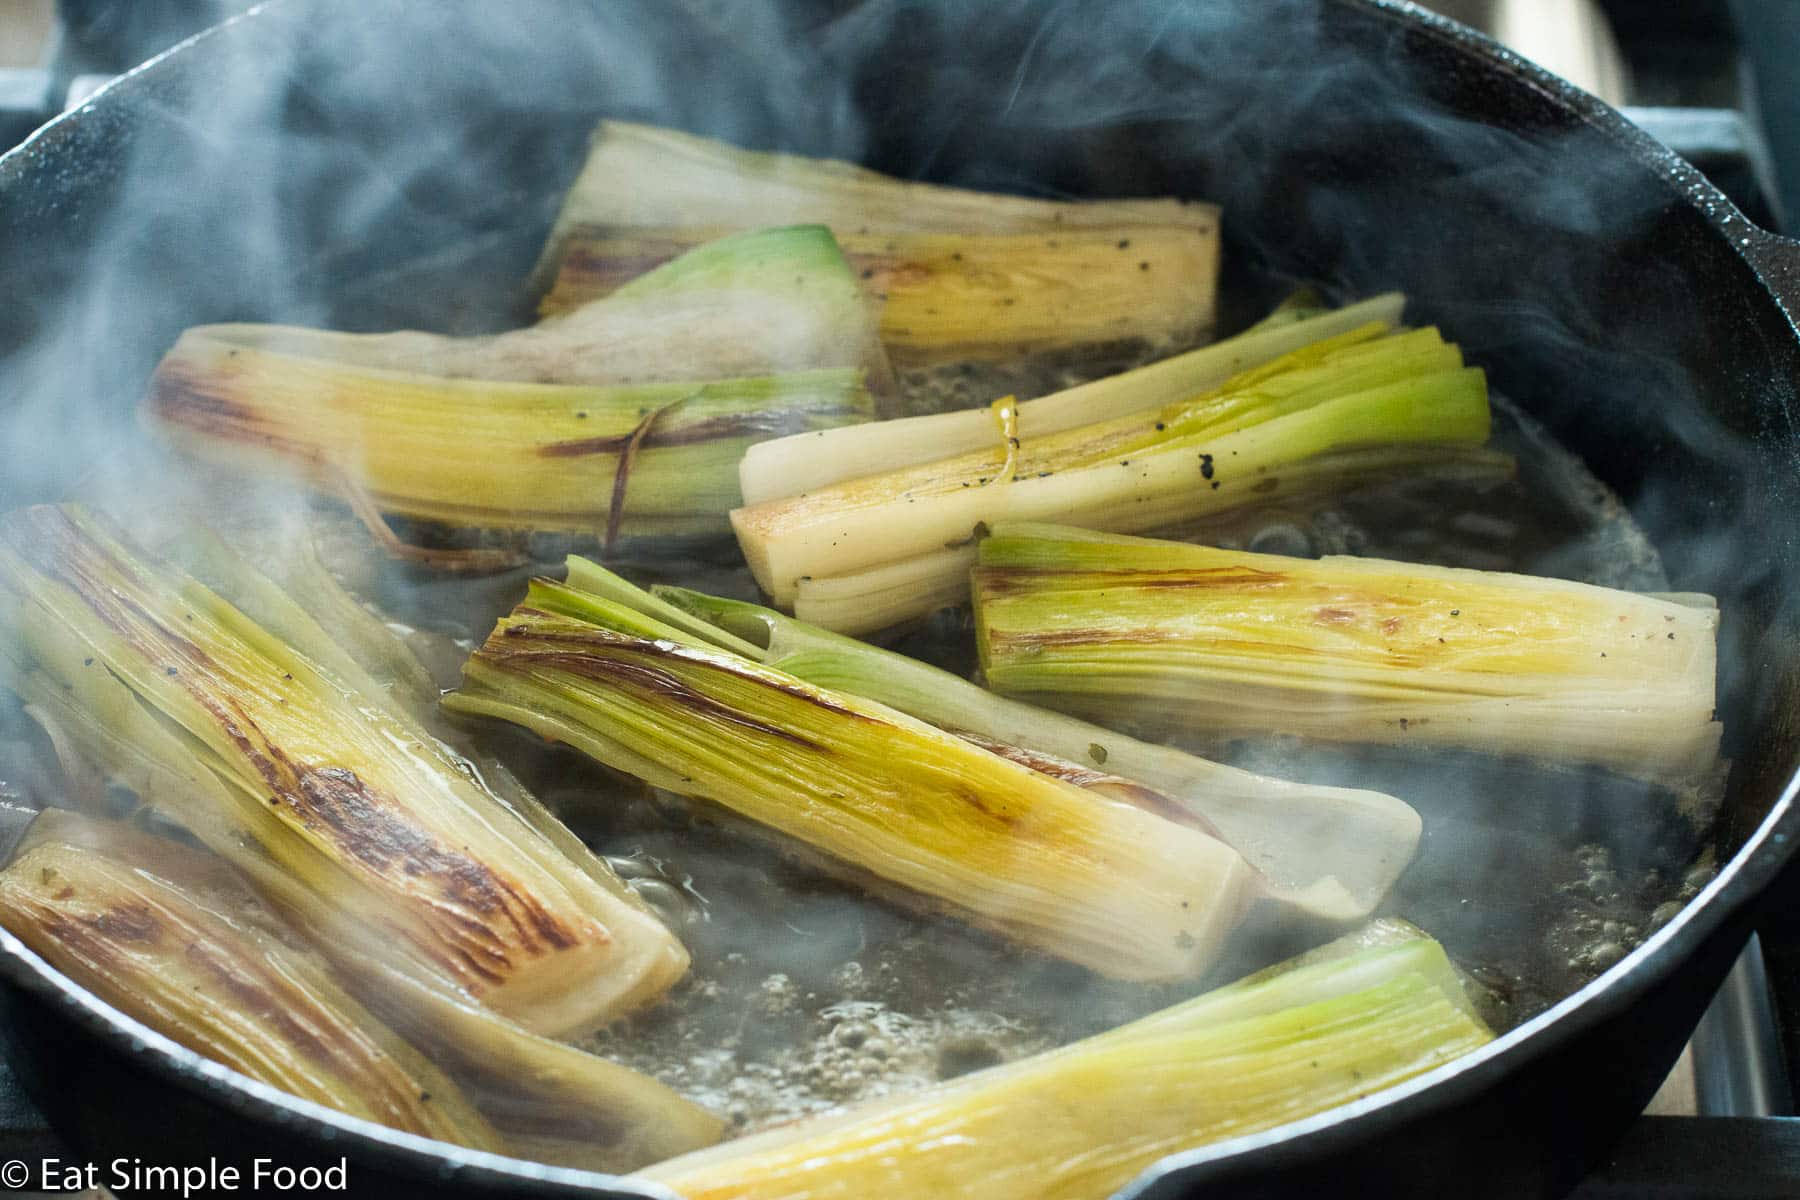 Eight leeks laved and seared side up with liquid cooking in a black cast iron skillet. Liquid is simmering and light smoke is rising.